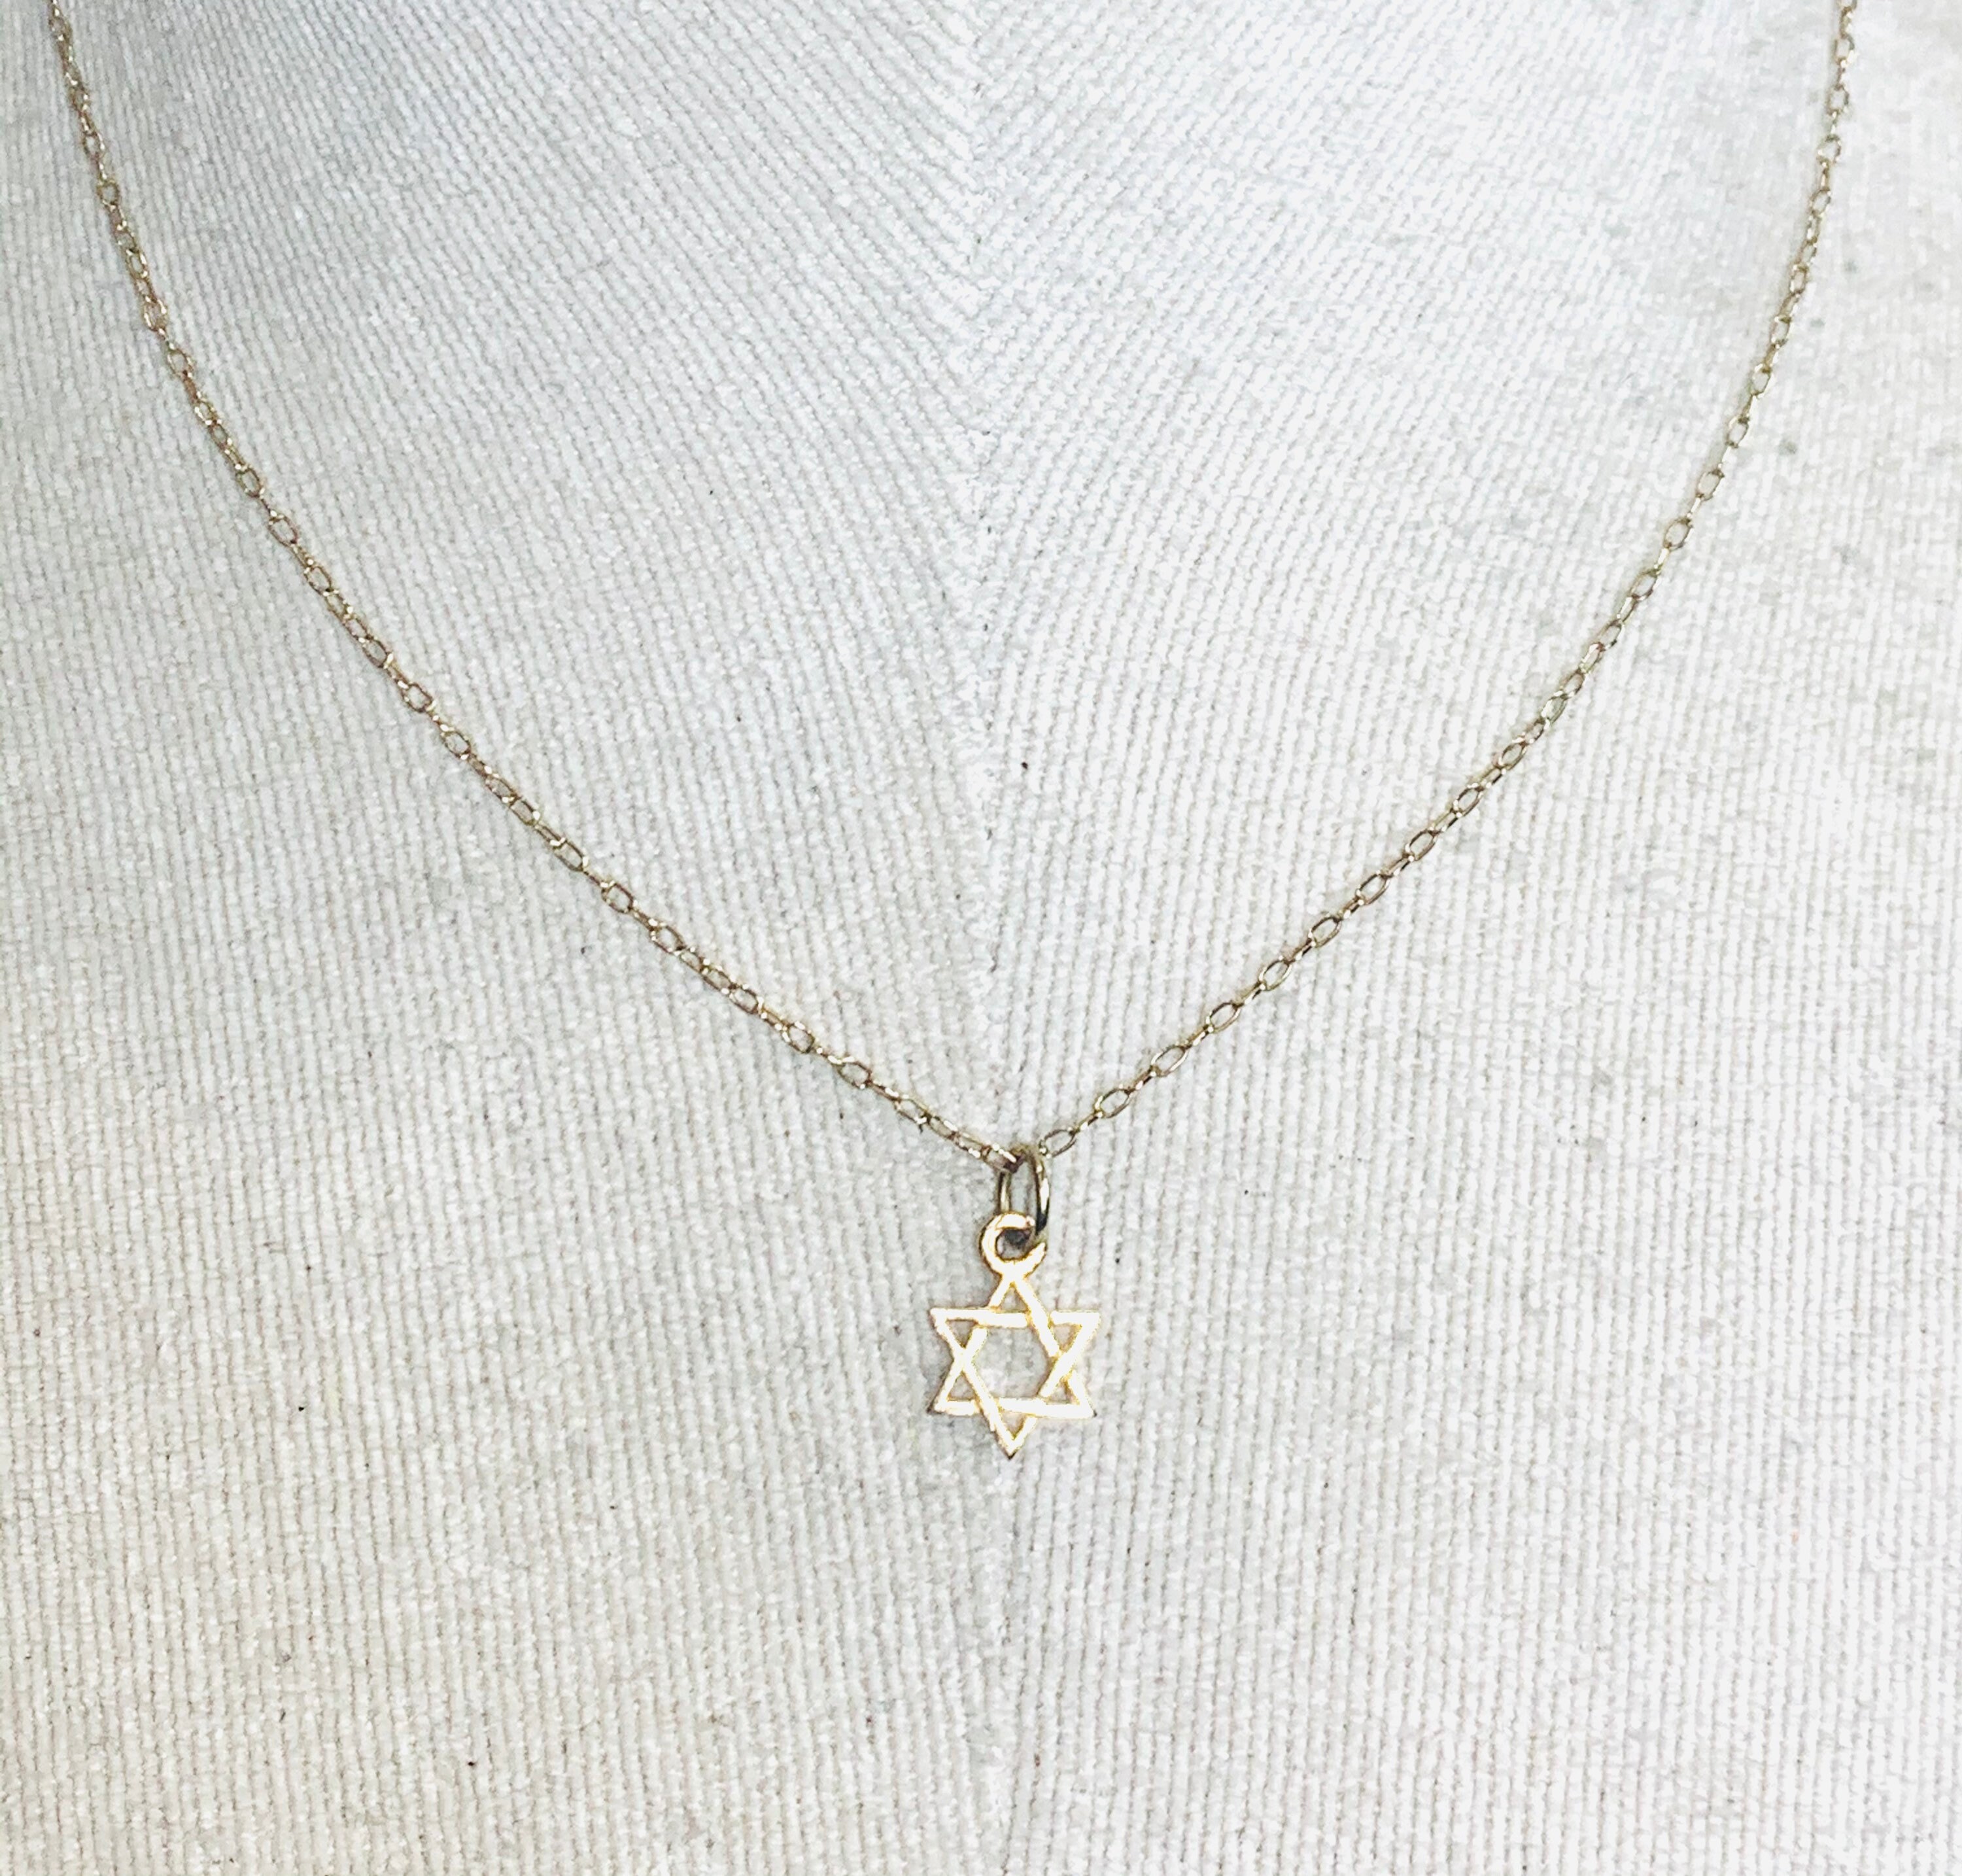 Antique Ladies or Childs 9ct gold 16 inch Star of David necklace ...